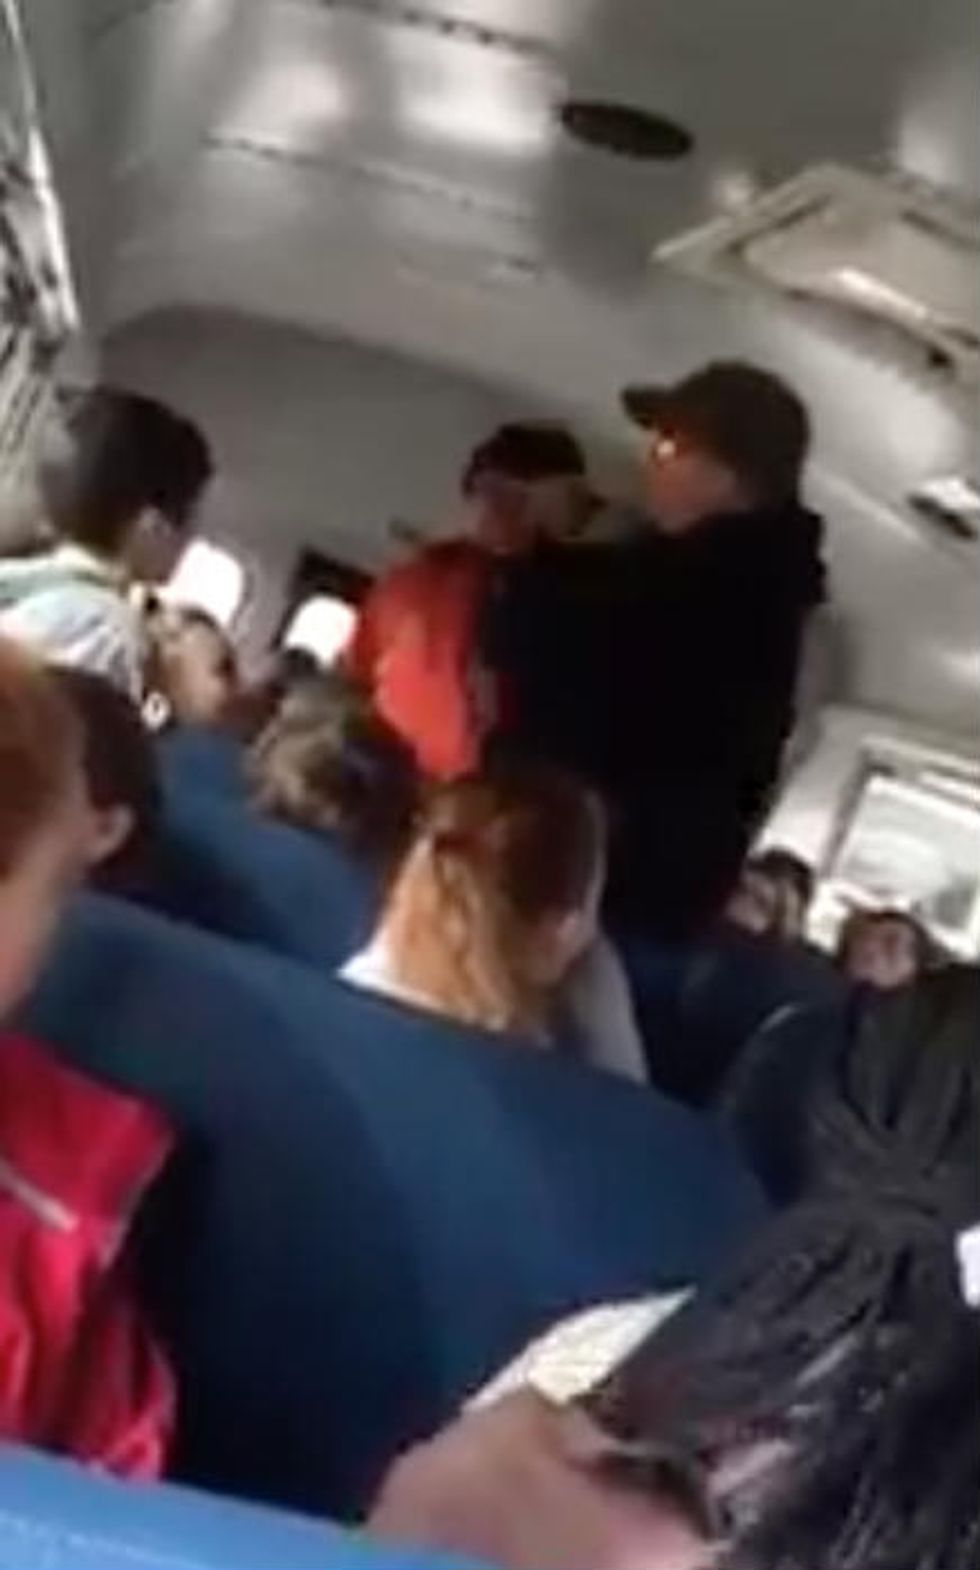 School Bus Driver Stopped to Confront Special Needs Student Not Following Directions — His Disturbing Actions Had Students Running From Bus at Next Stop